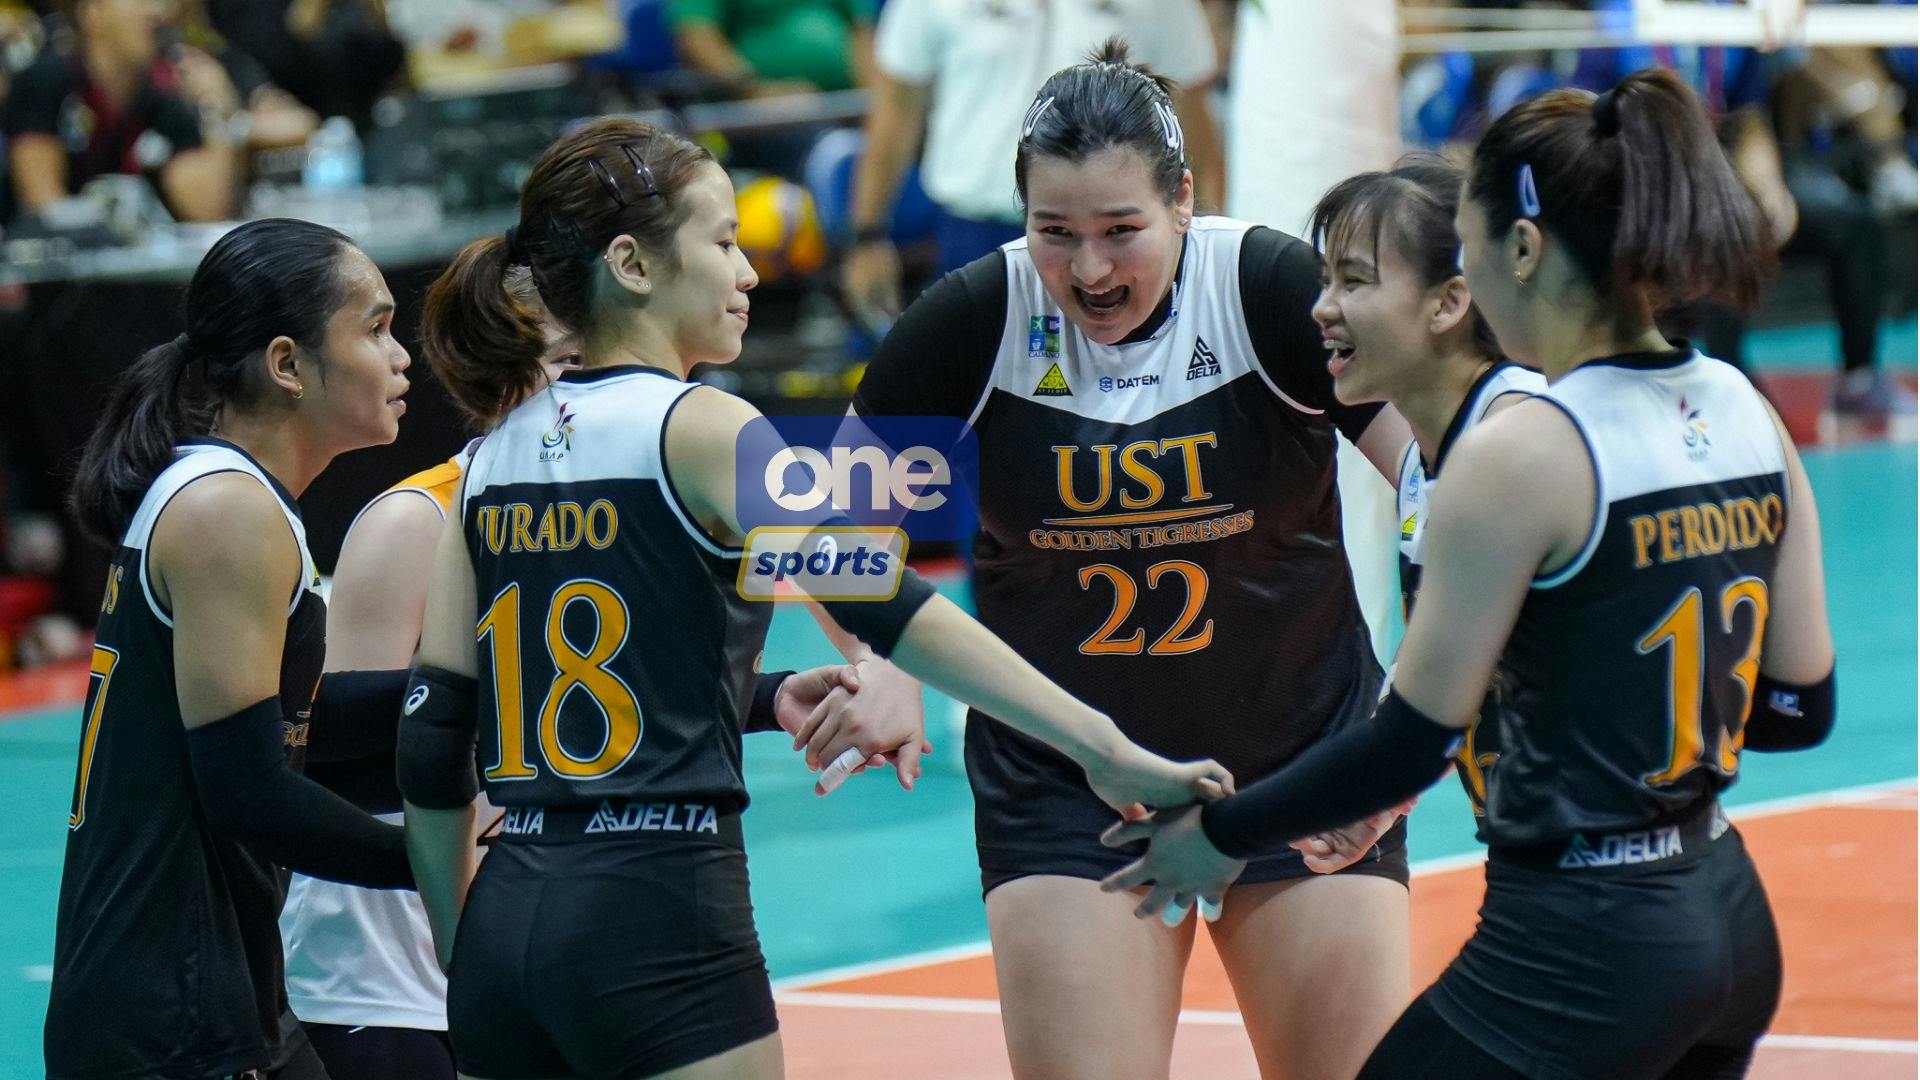 UAAP: UST’s Bianca Plaza shares positive update on Kobe 8 delivery mishap